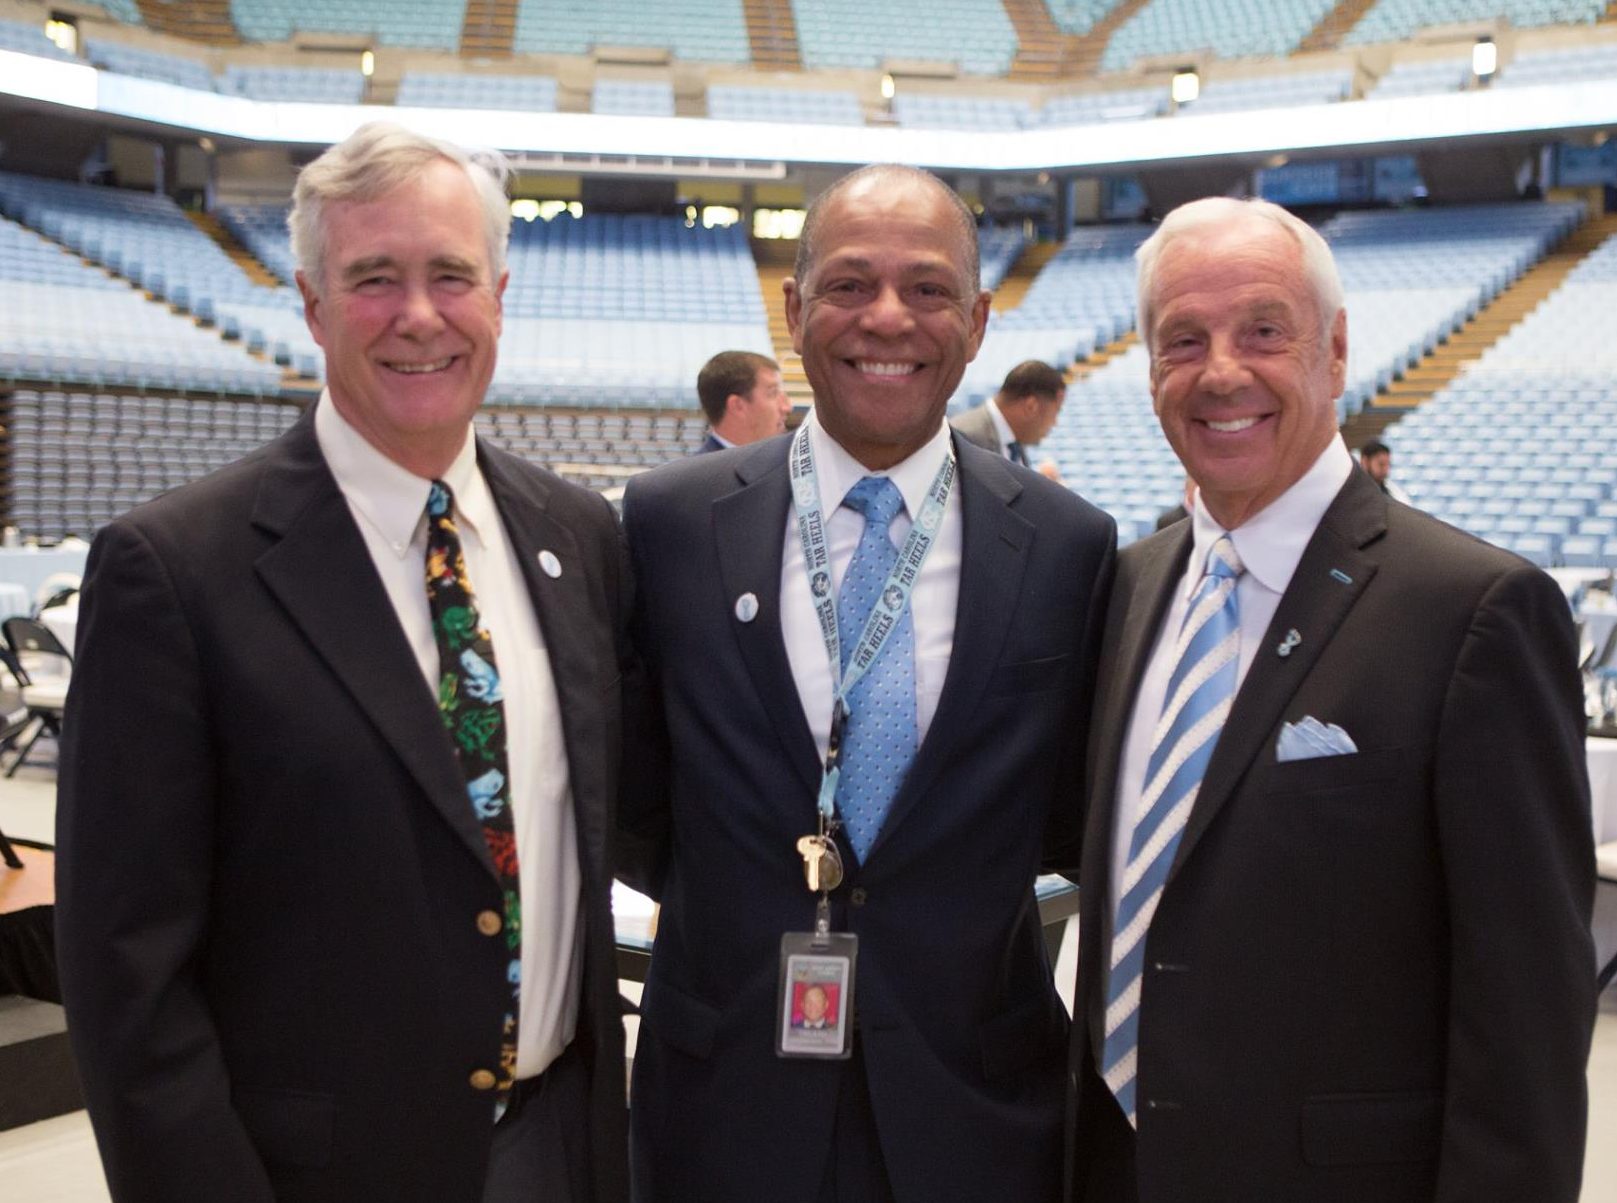 Thomas C. Shea, MD, UNC Lineberger member and director of the UNC Bone Marrow Transplant and Cellular Therapy Program,  North Carolina Senior Resident Superior Court Judge Carl Fox, and UNC mens basketball coach Roy Williams.